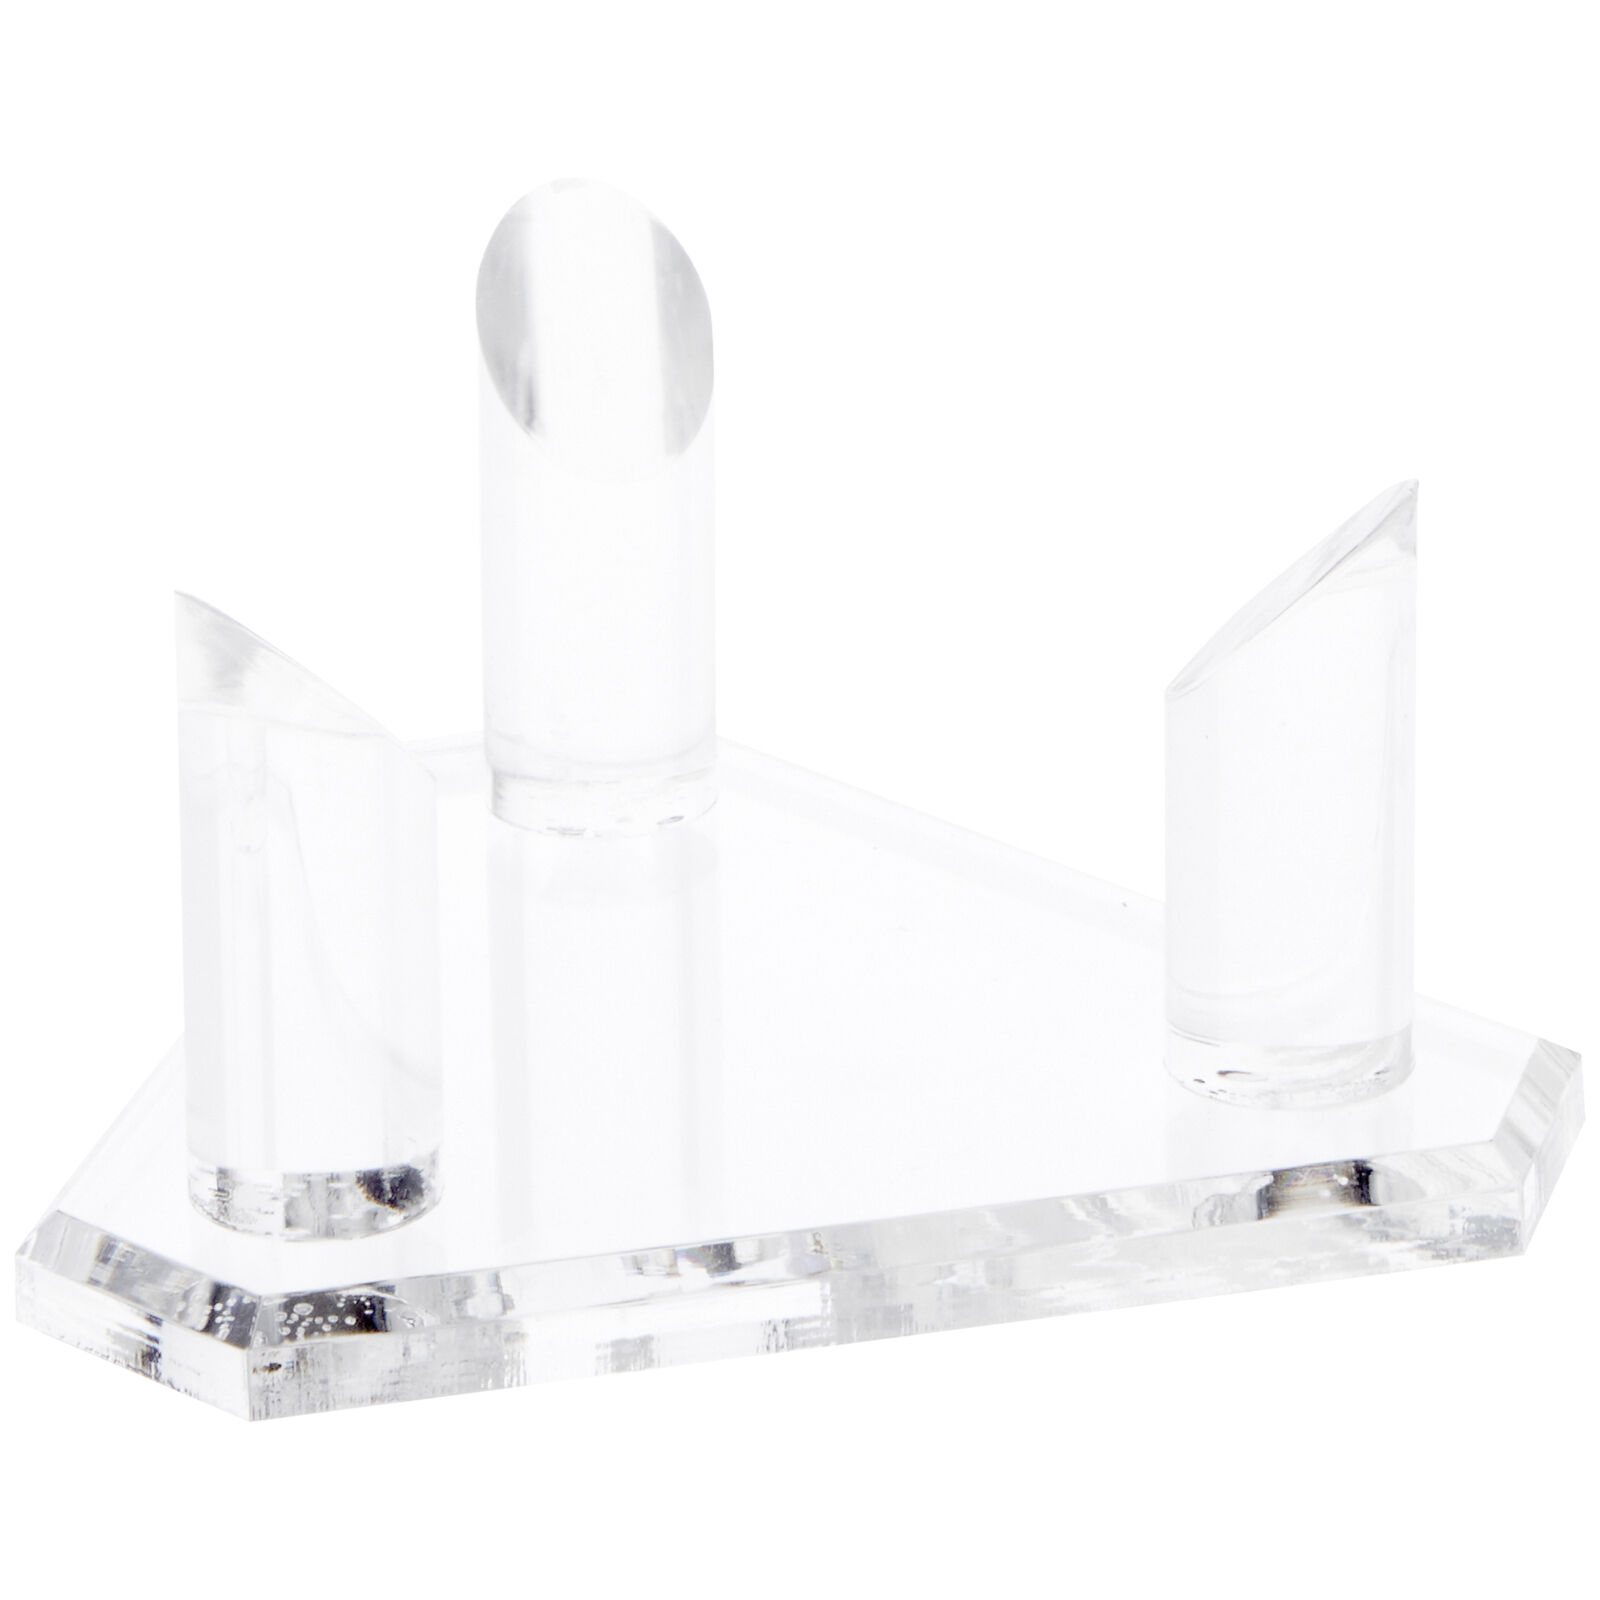 Plymor Acrylic Base W/ 3 Prongs For Large Ball, 2.875"h X 5"w X 4.375"d (6 Pack)